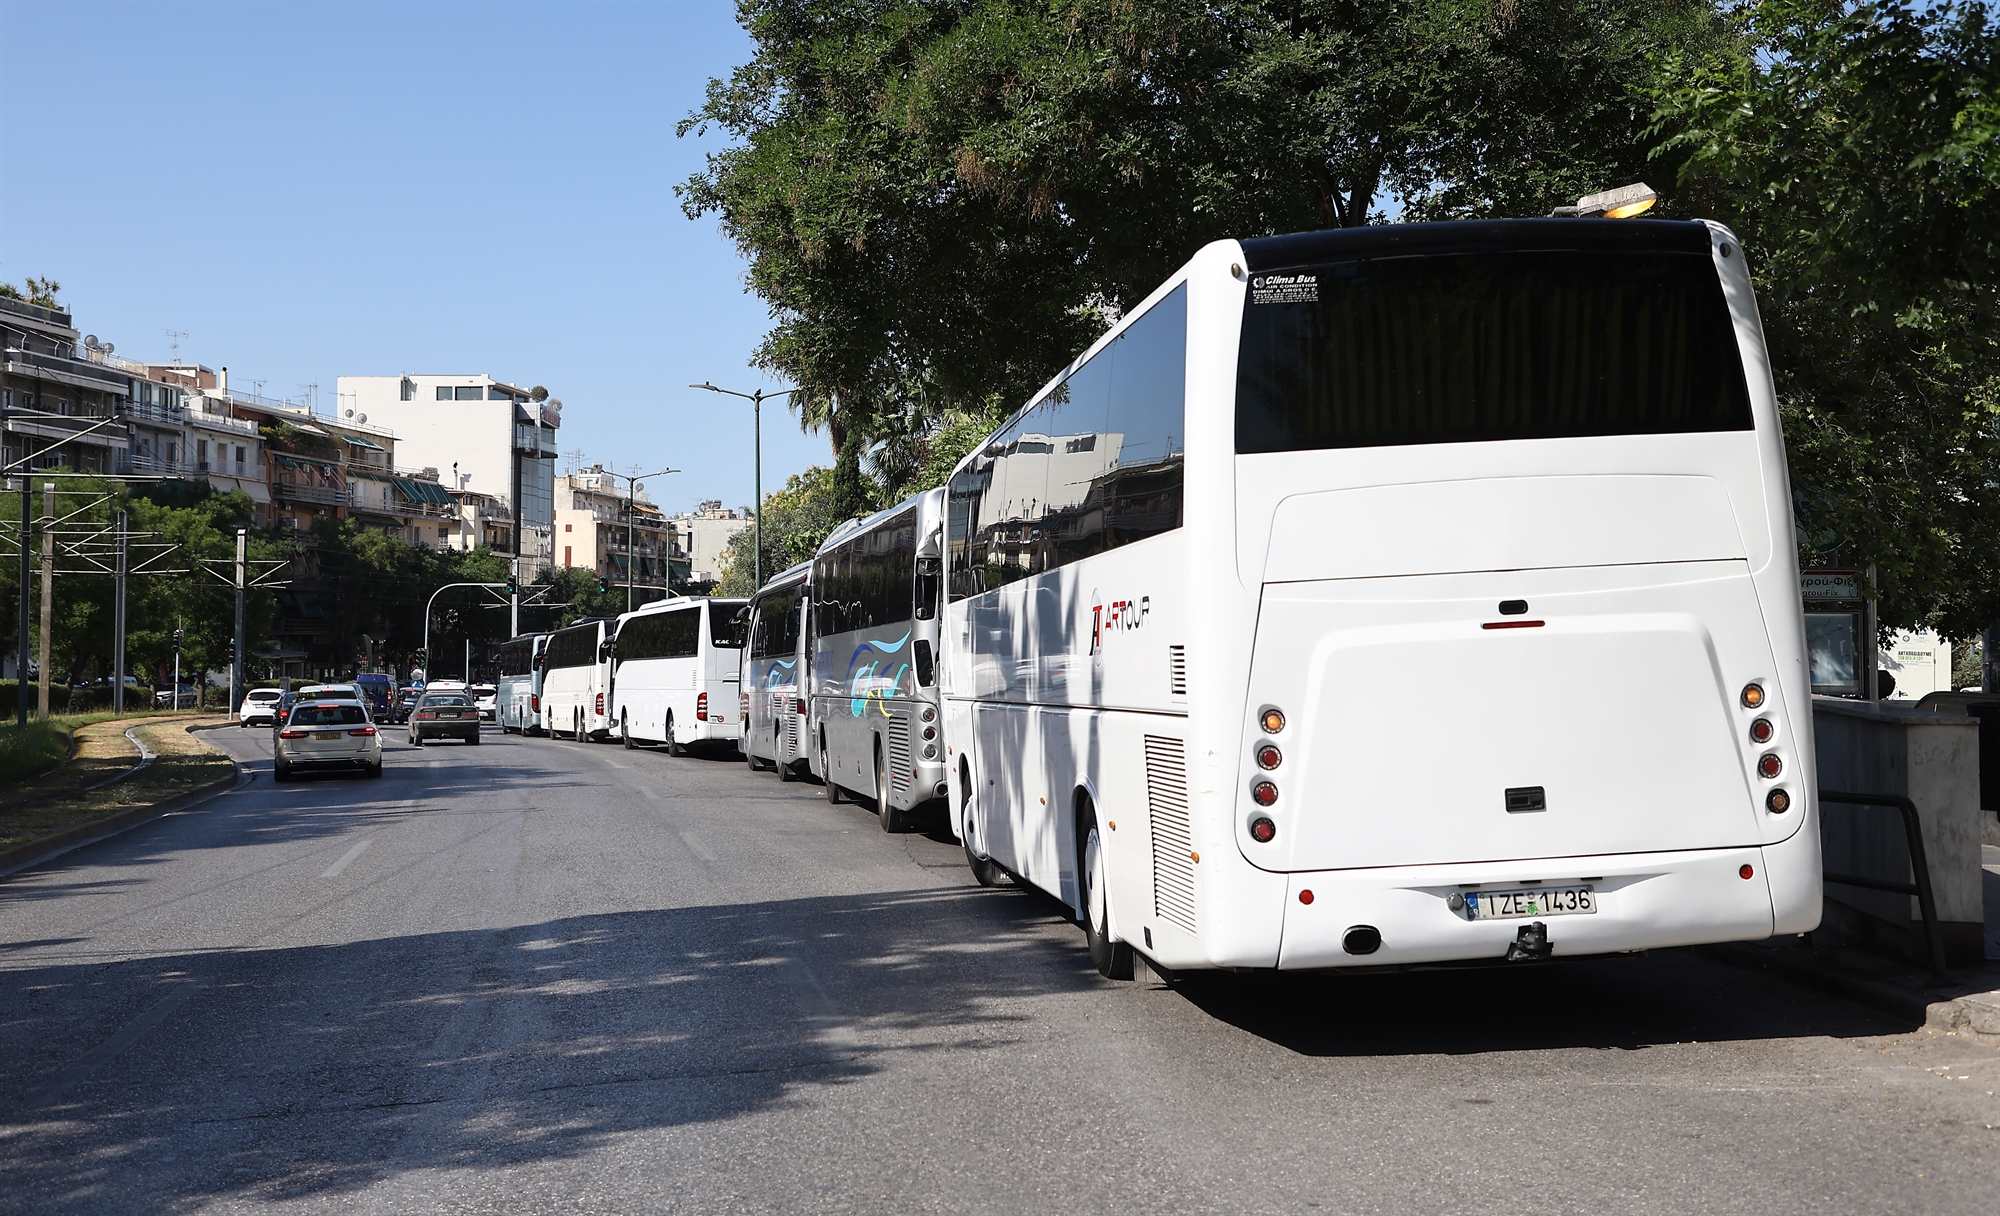 tourist-buses-create-gridlock-in-athens1